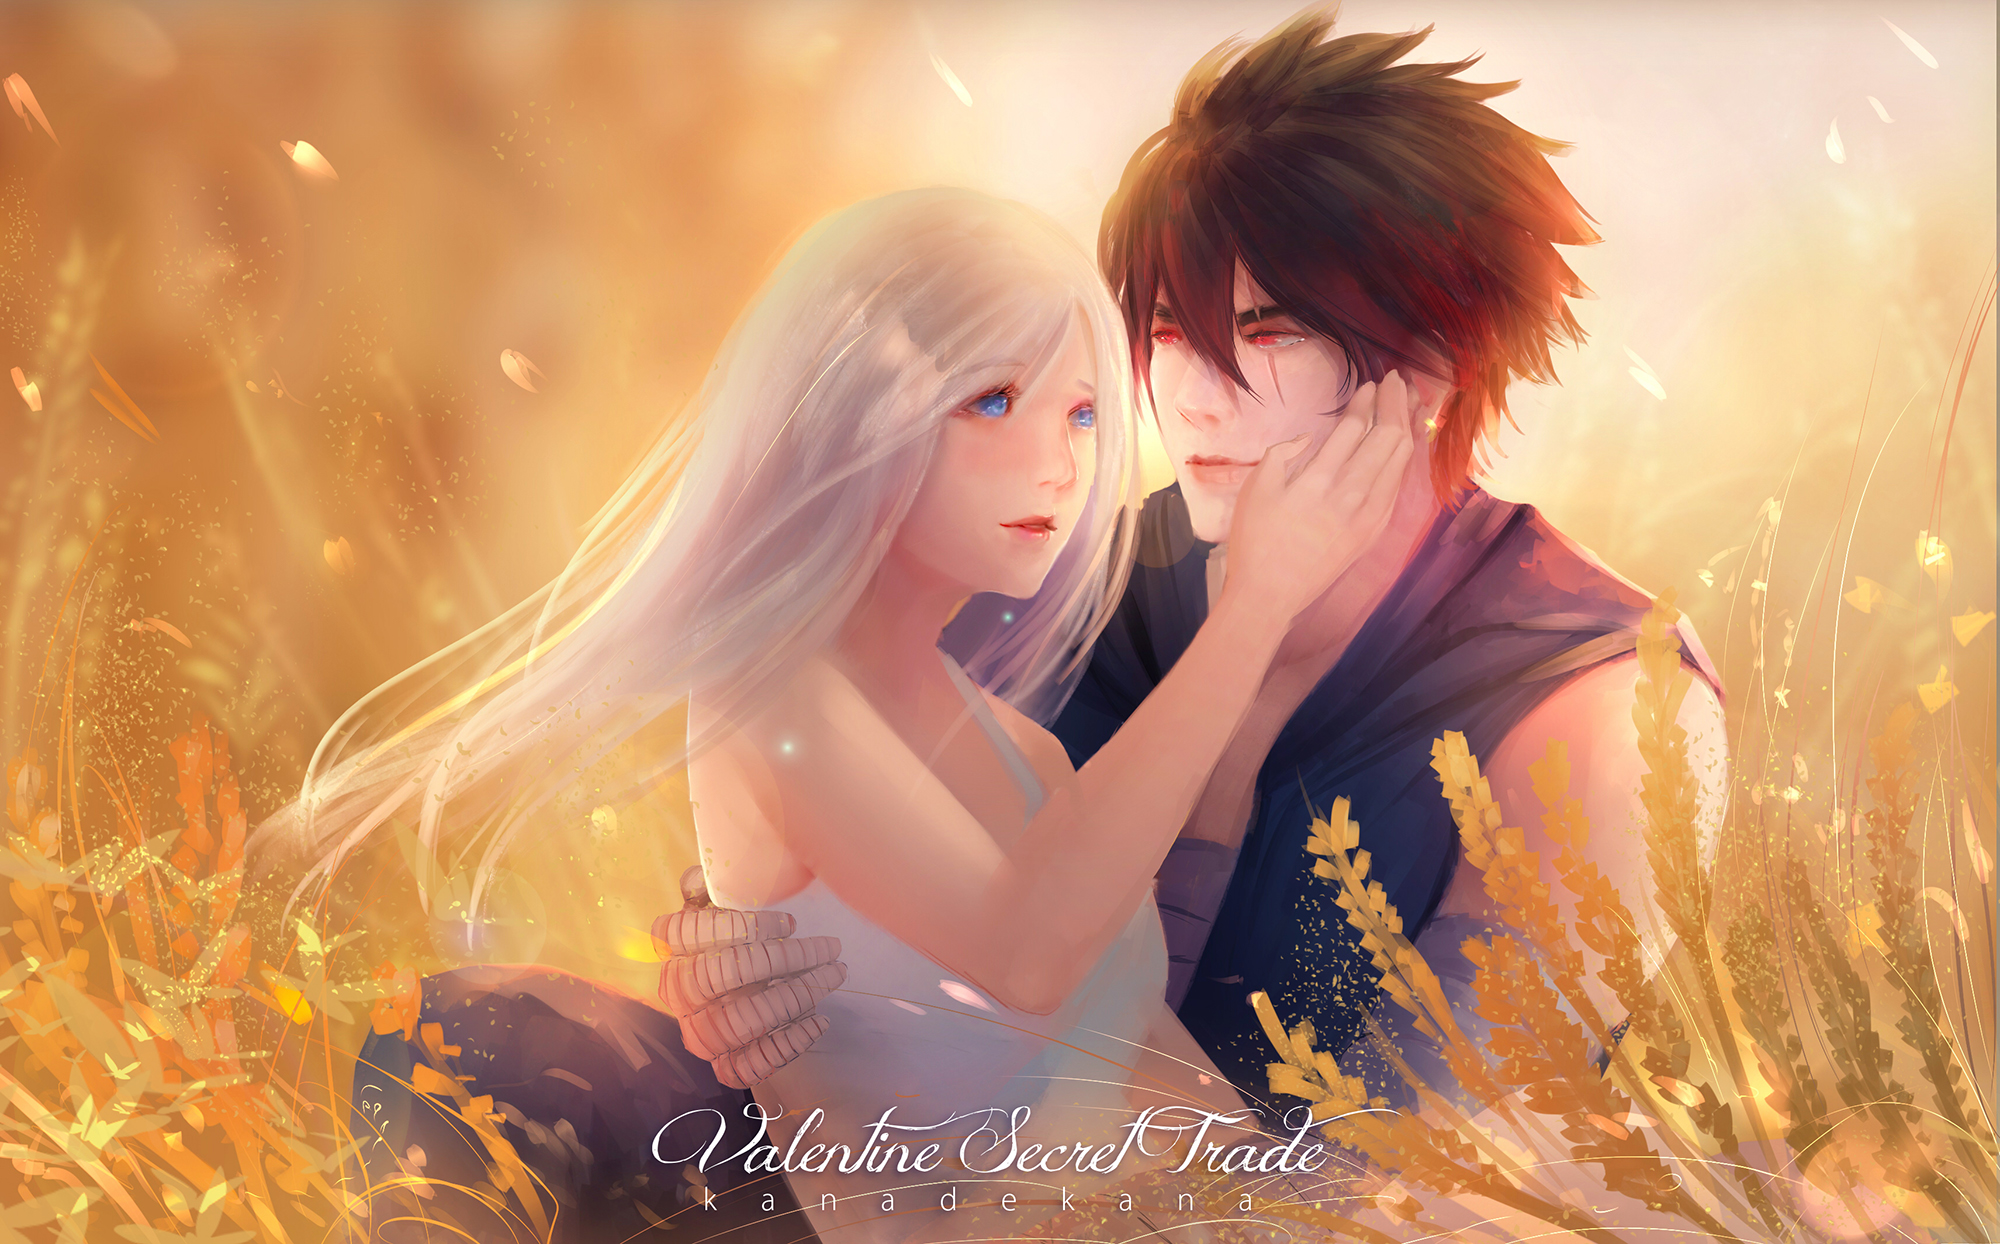 Anime Couple Background Images, HD Pictures and Wallpaper For Free Download